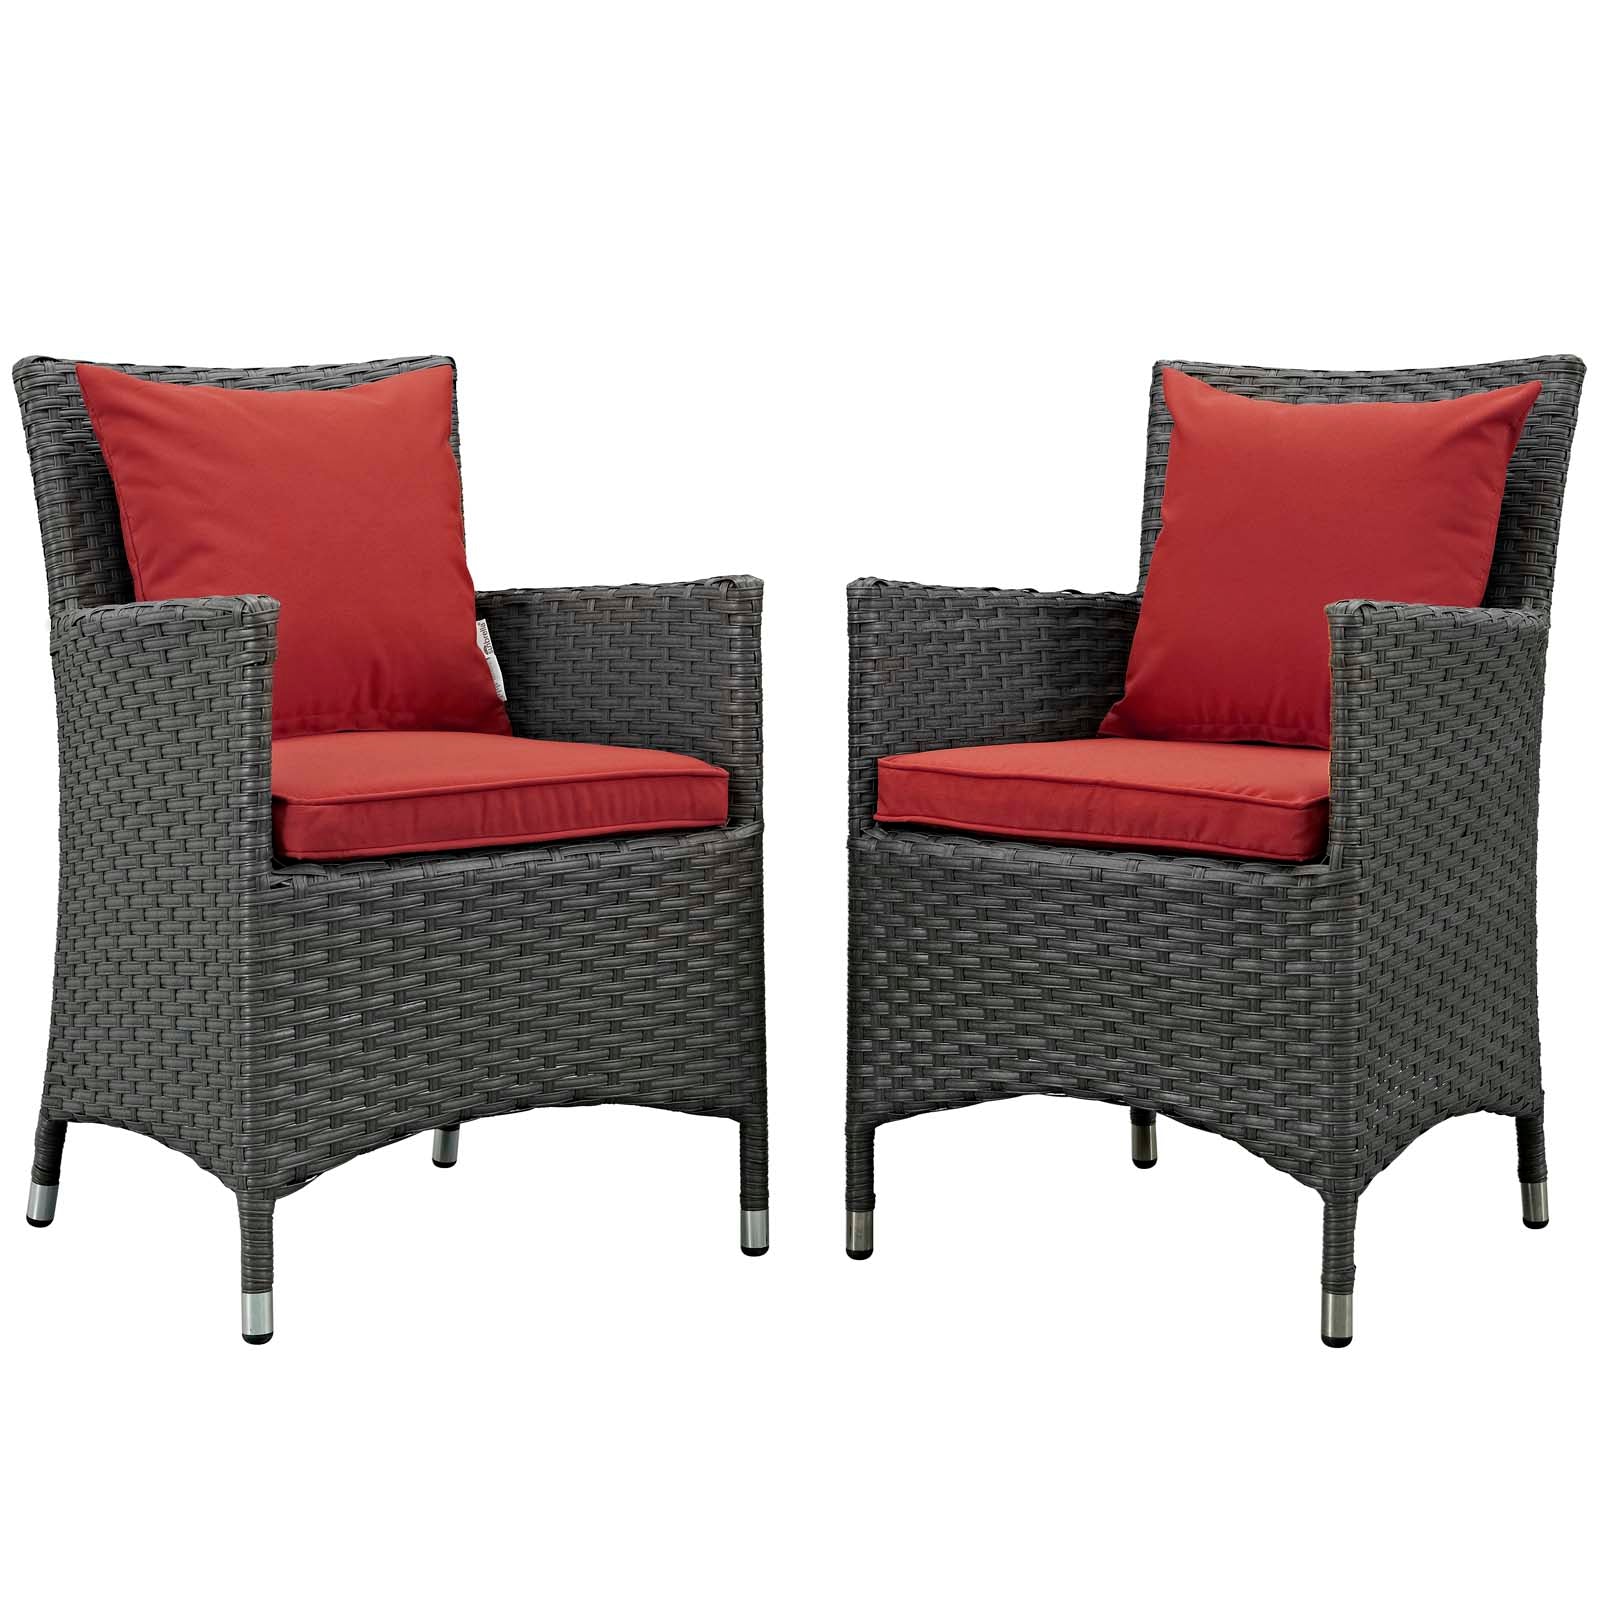 Modway Outdoor Dining Sets - Sojourn 2 Piece Outdoor Patio Sunbrella Dining Set Canvas Red